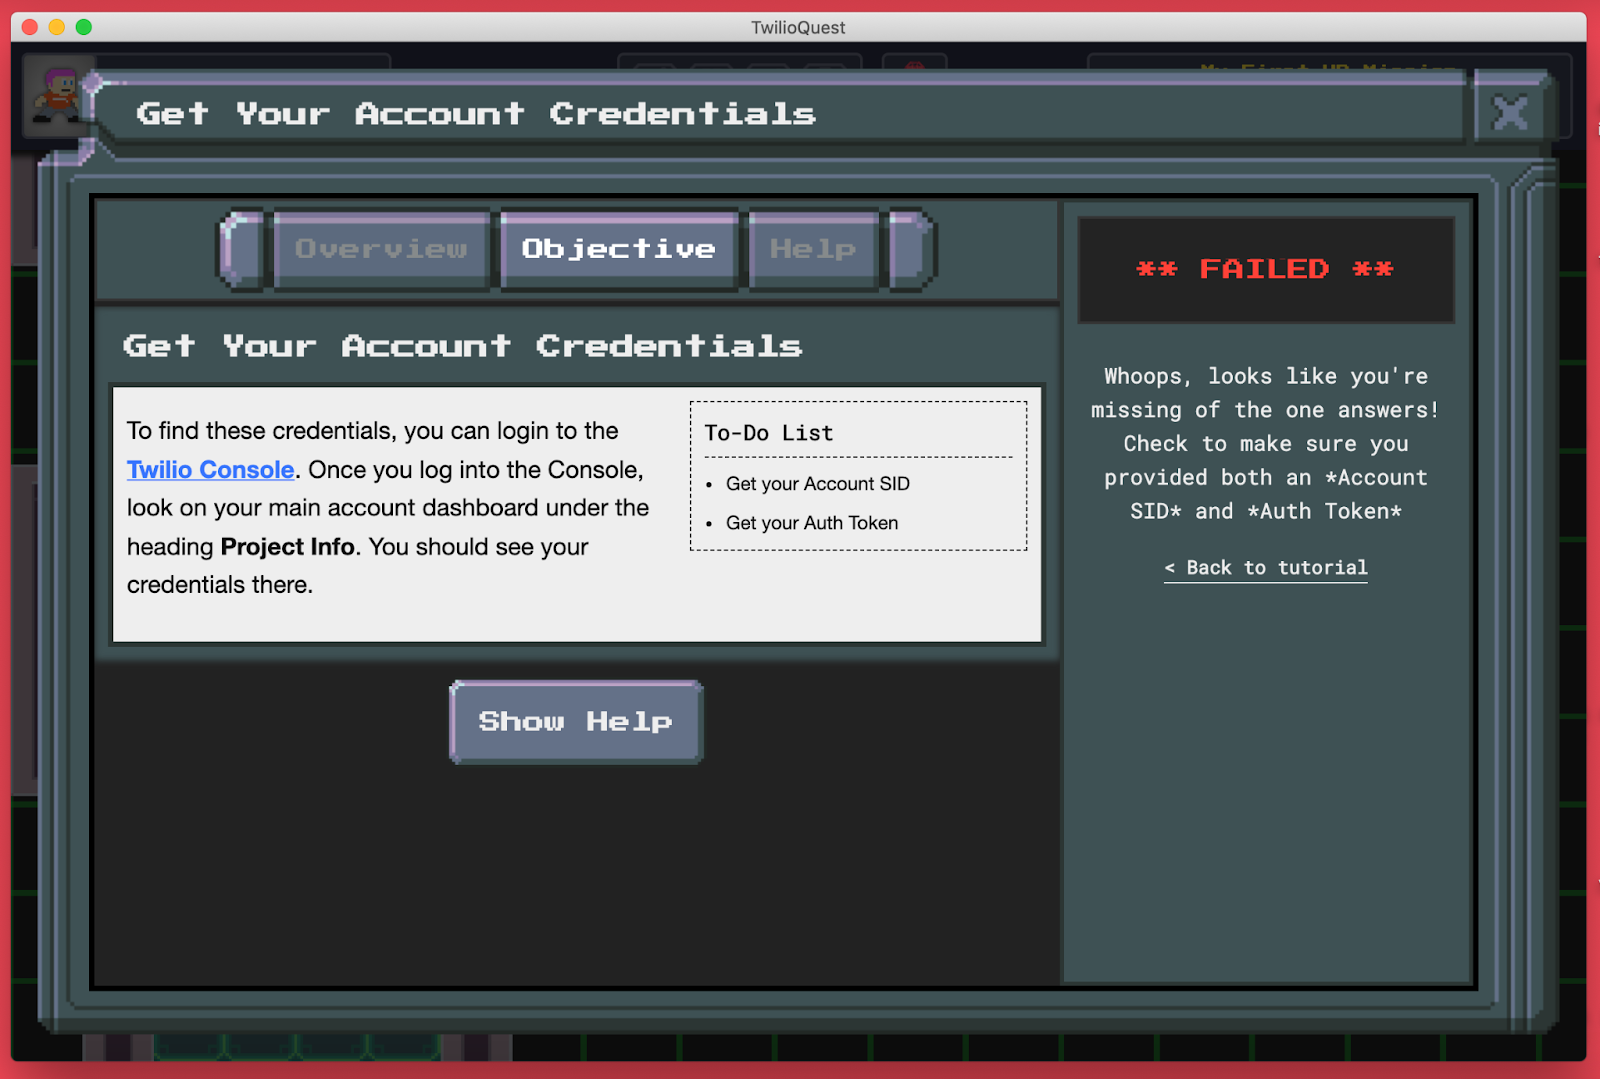 Screenshot showing the failed the objective with the failure message inside the TwilioQuest game